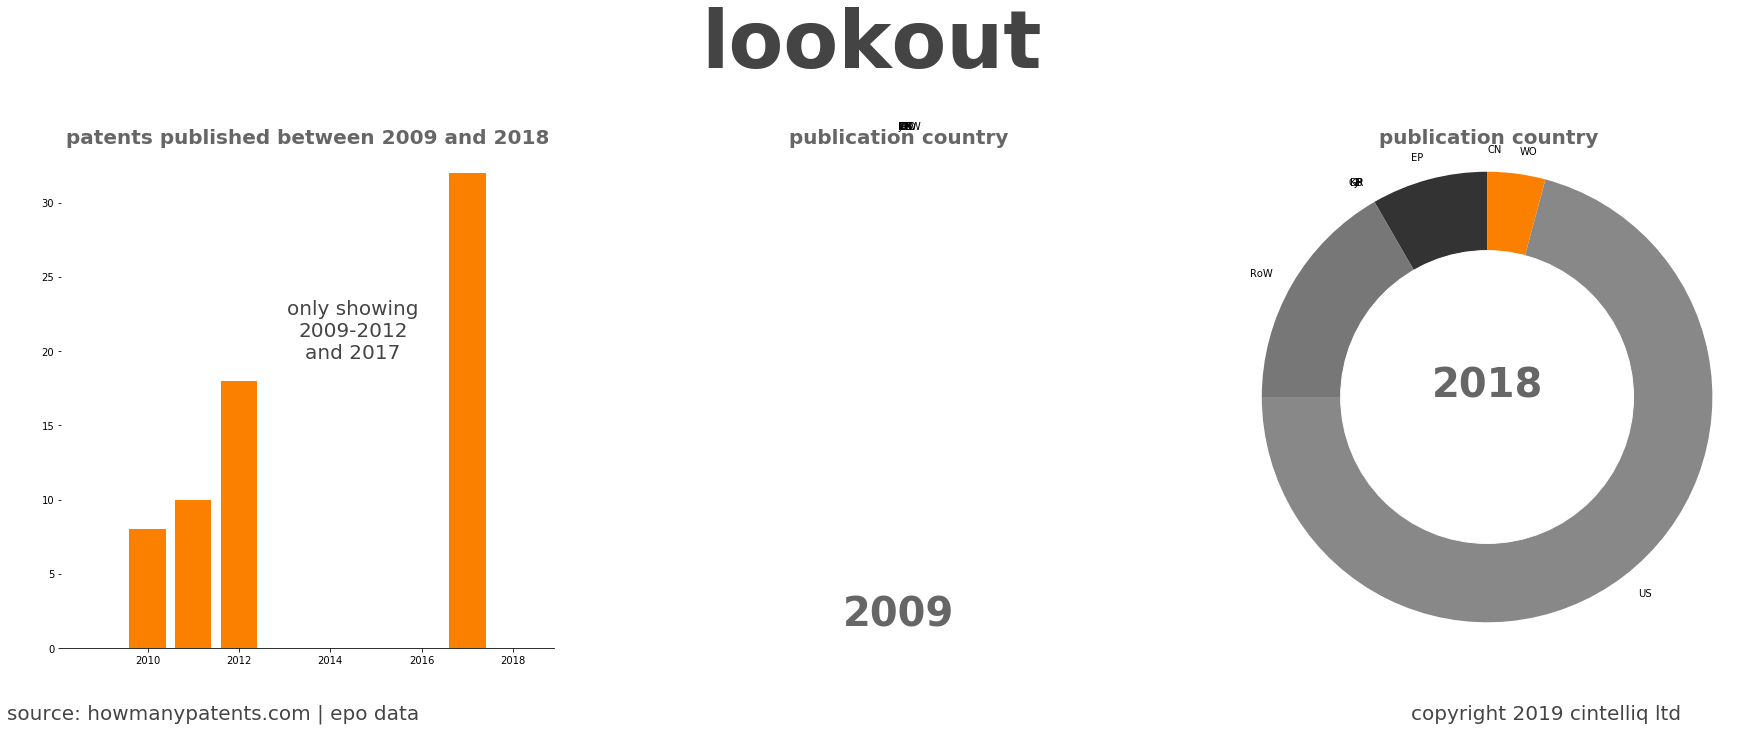 summary of patents for Lookout